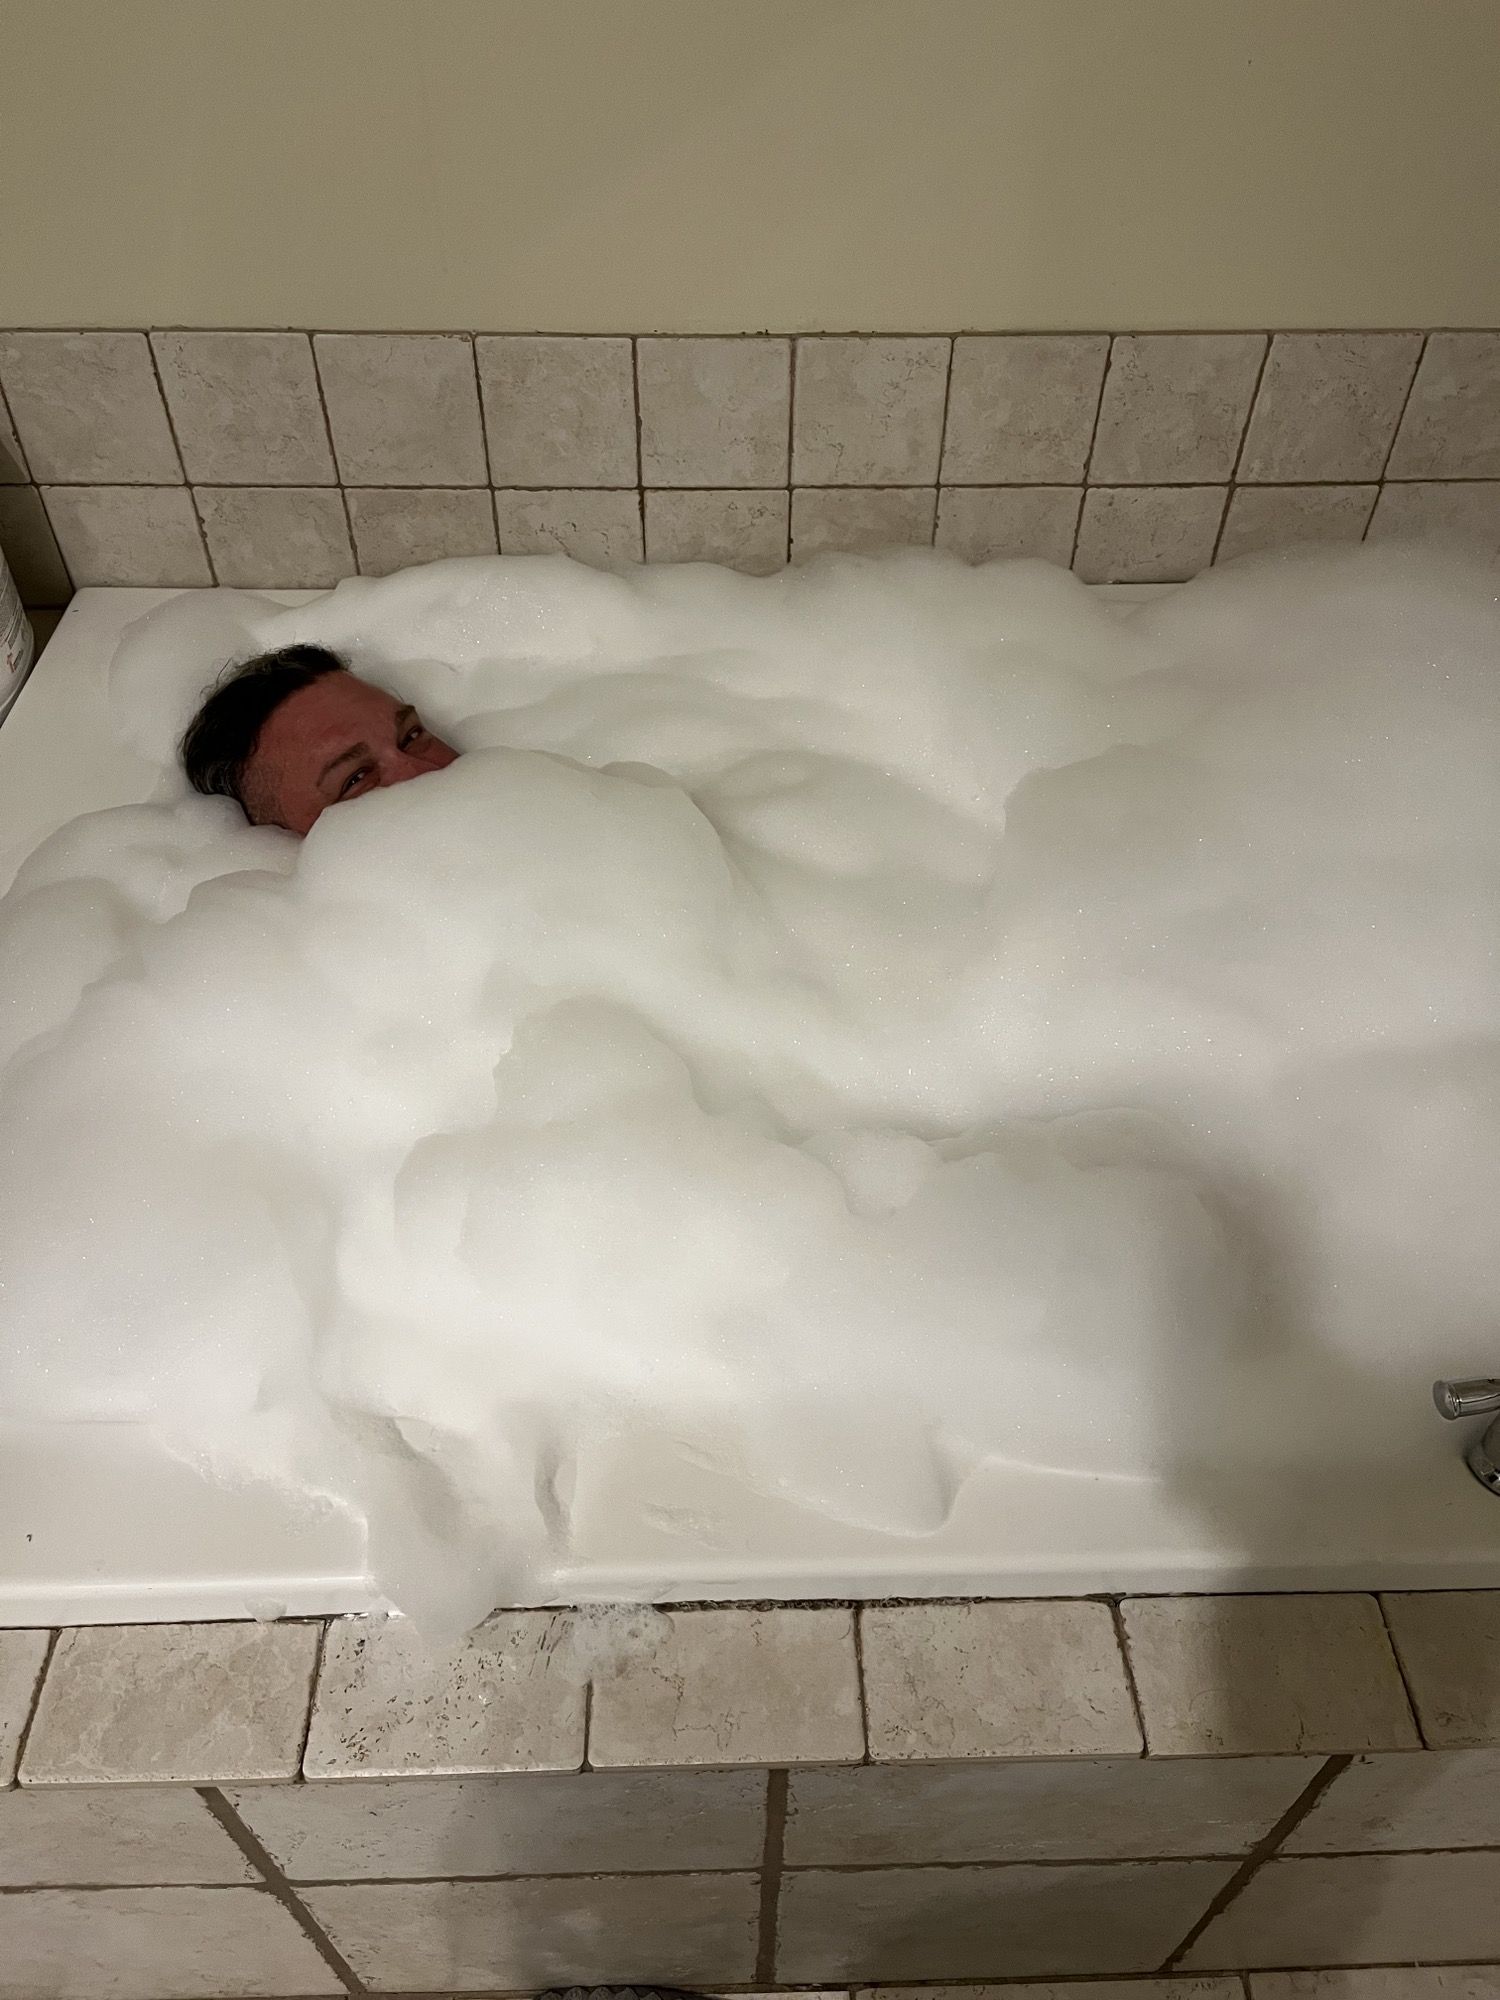 First bubble bath in nearly 35 years. I think I did something wrong?